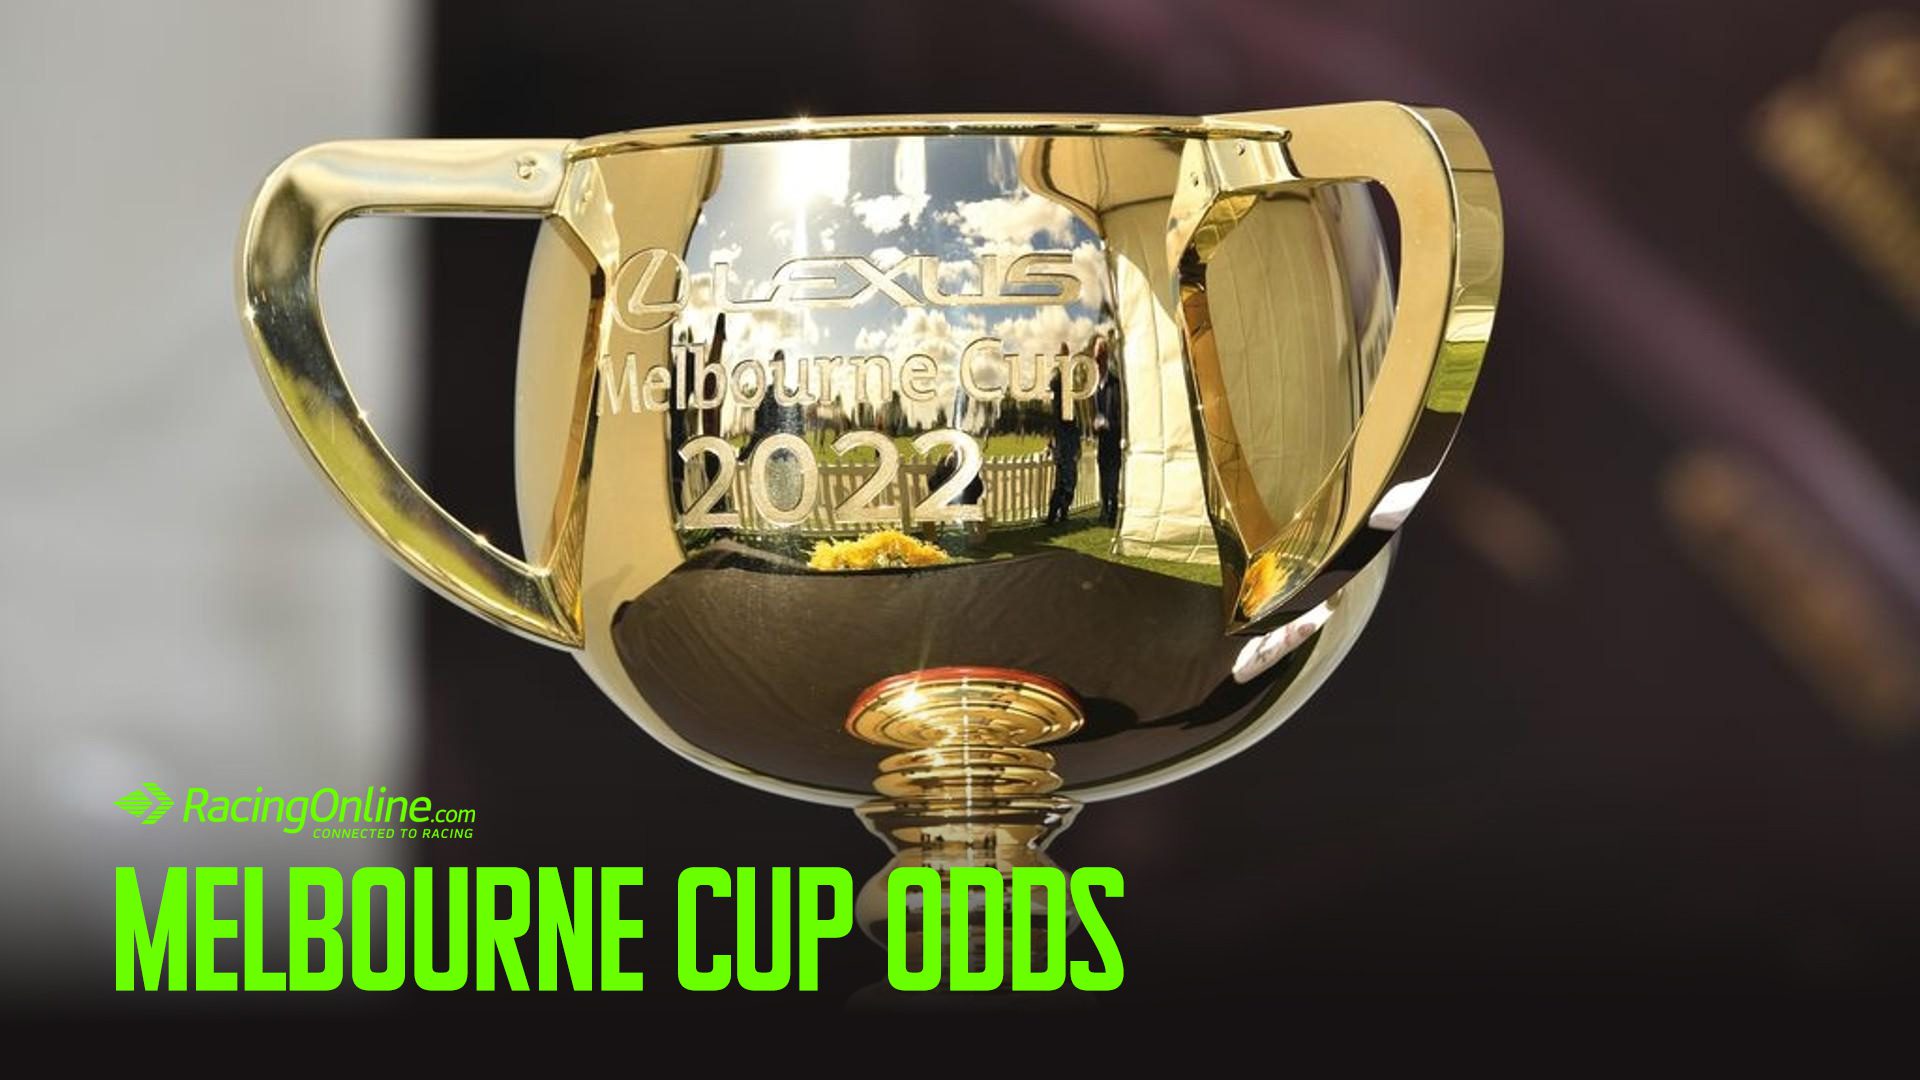 2023 Melbourne Cup odds